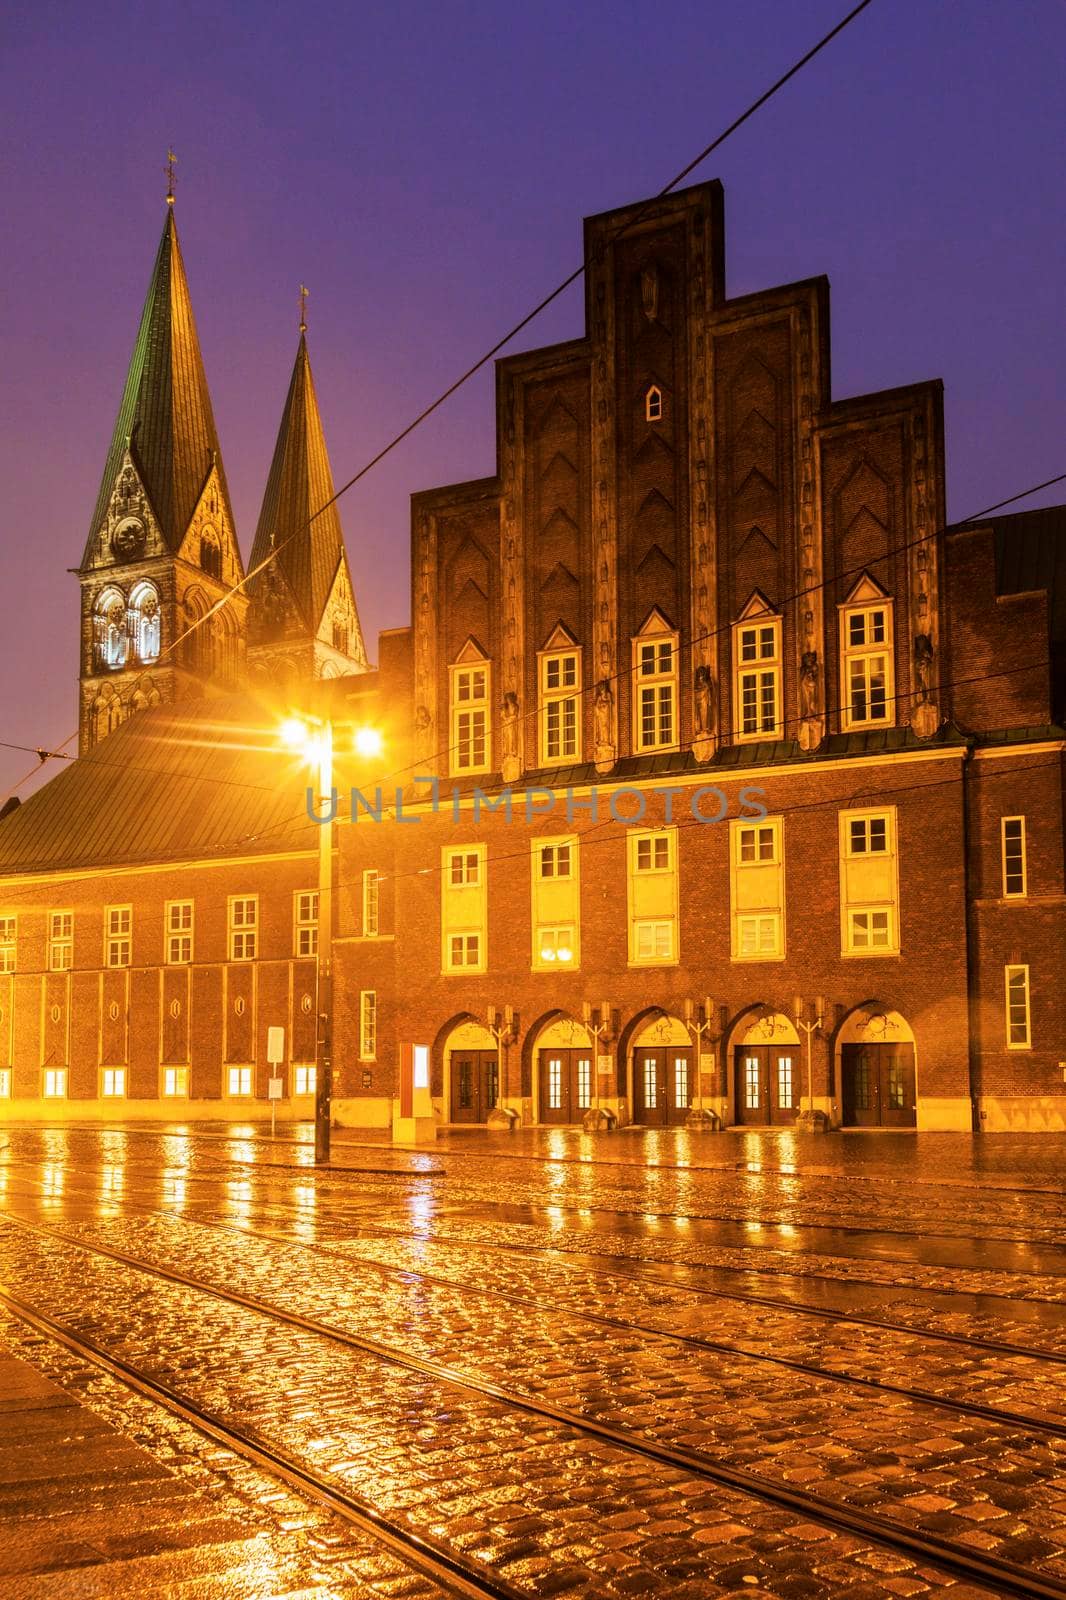 Rain by St. Peter's Cathedral in Bremen. Bremen, Germany.